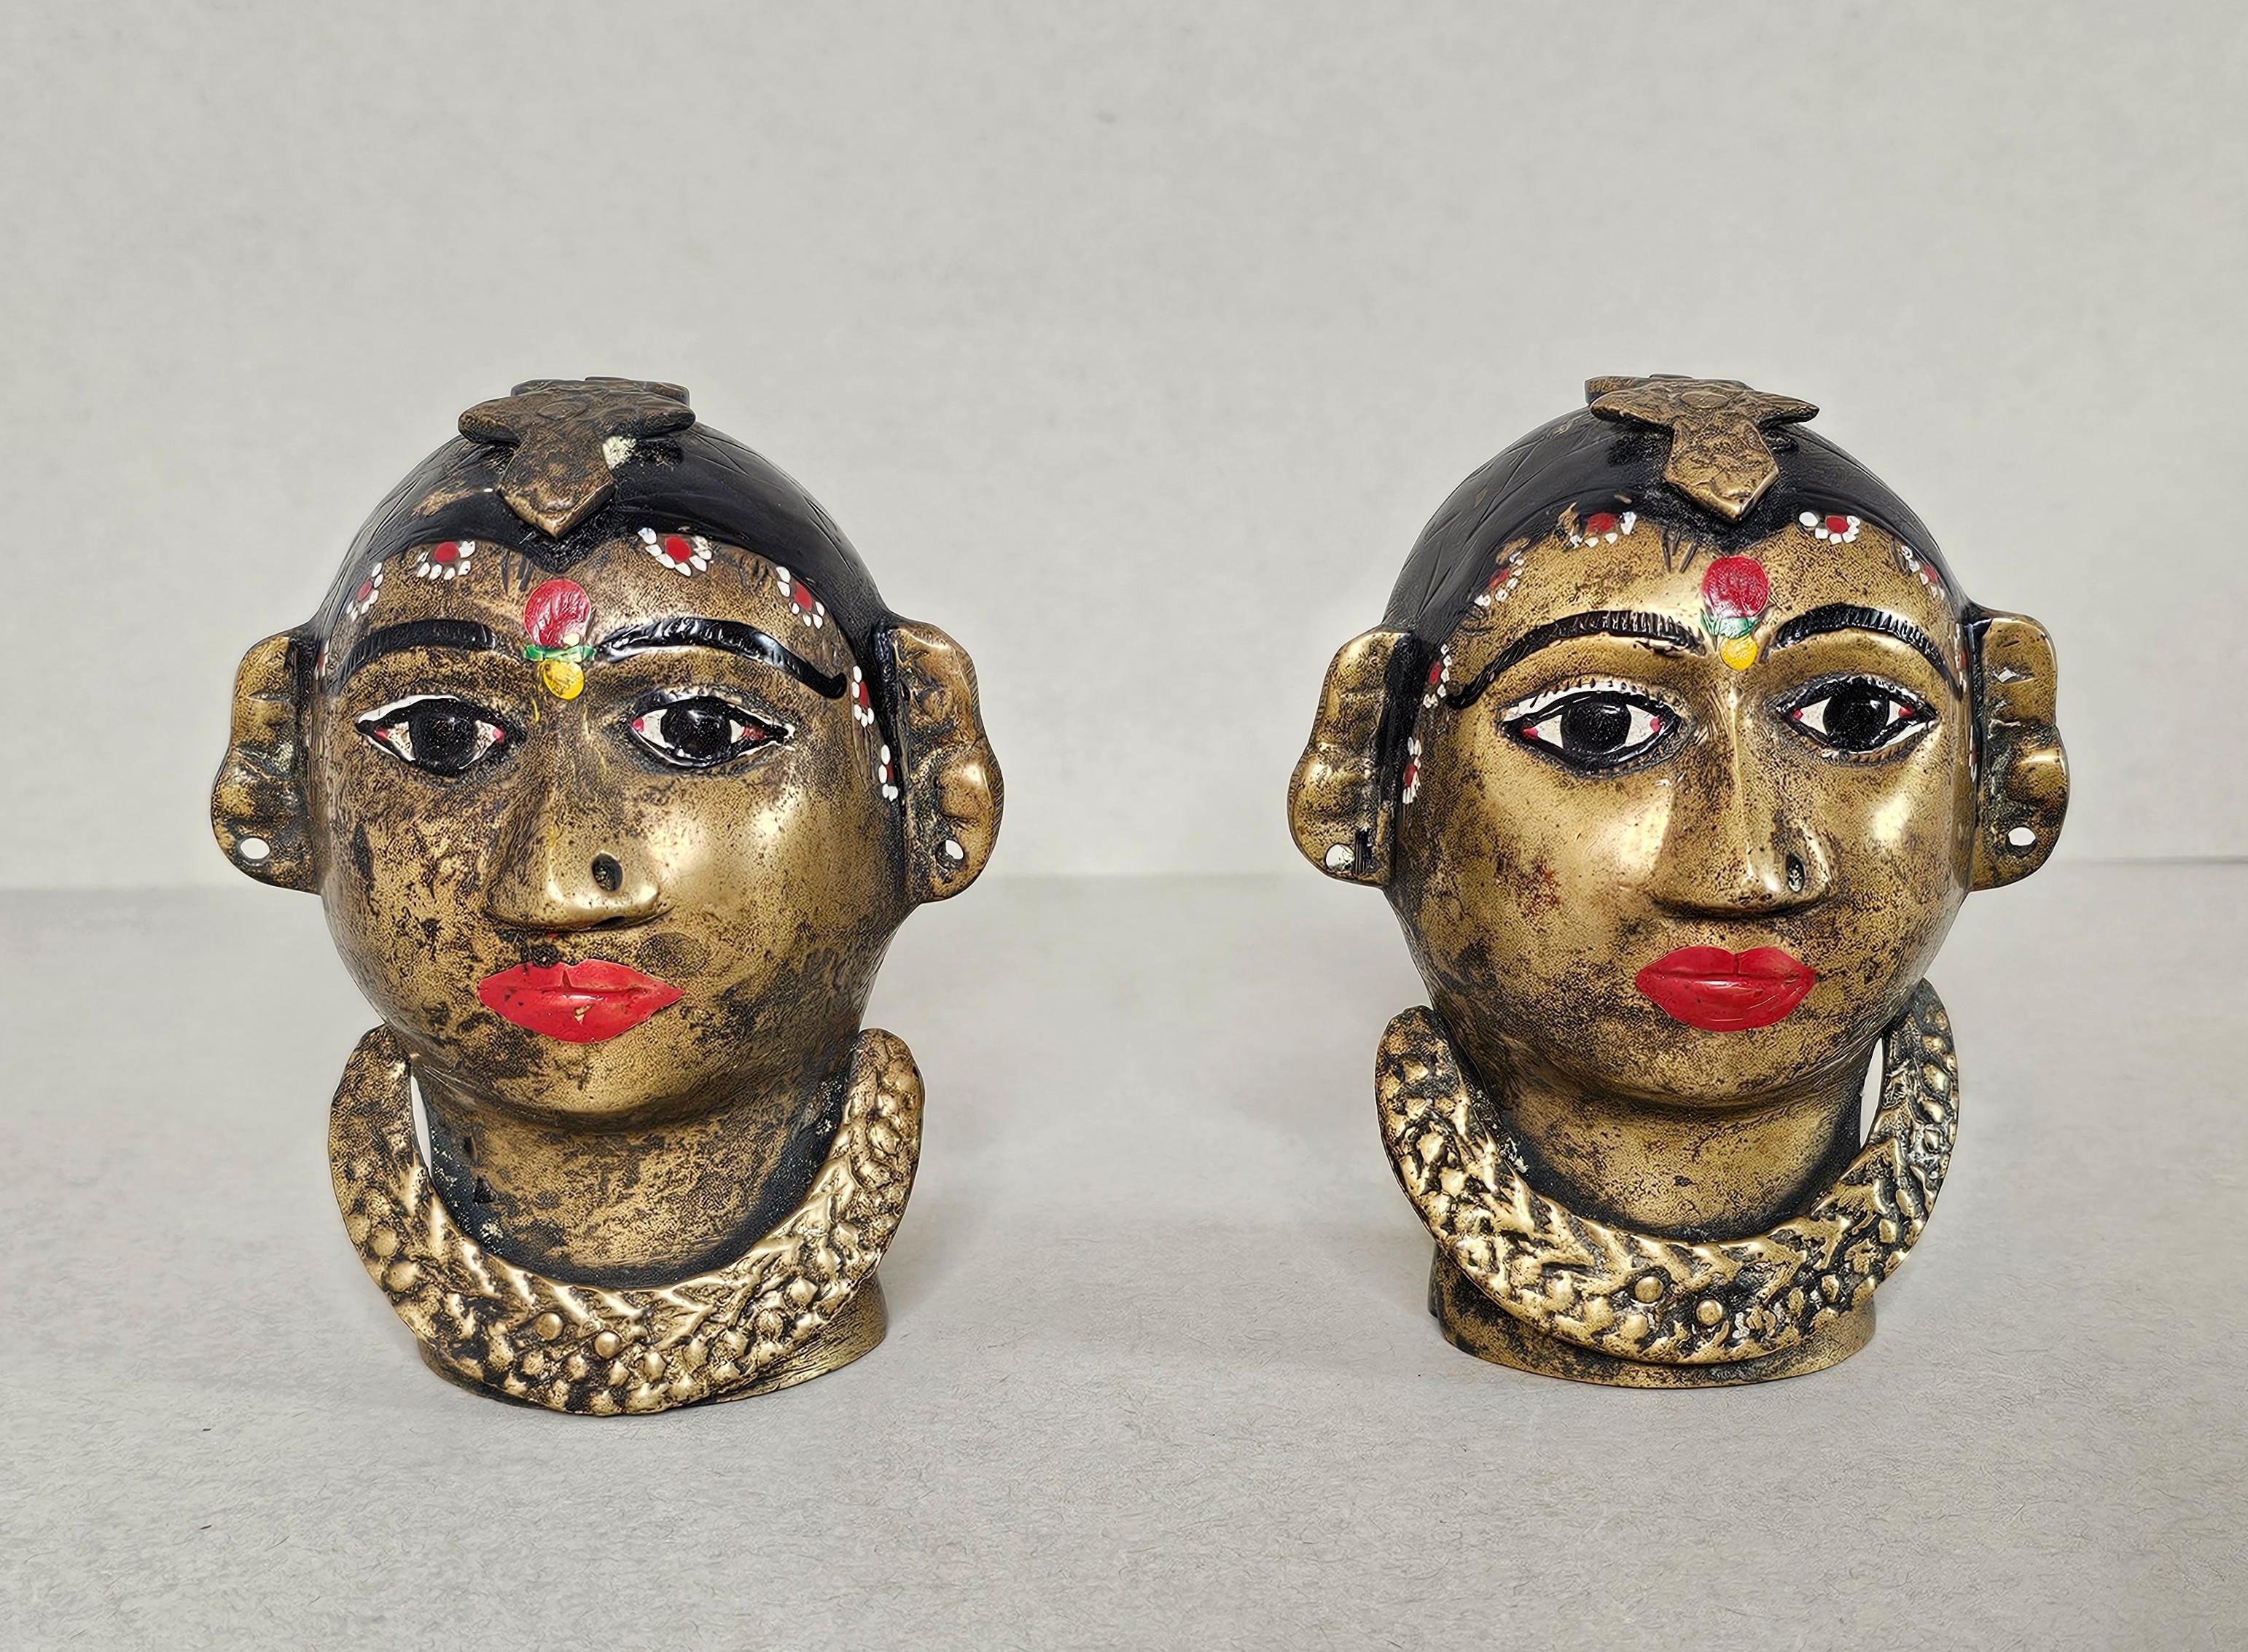 A pair of antique Indian hand-painted figural brass head religious sculptures. 

Hand-crafted in the Maharashtra or Karnataka region of India in the late 19th / early 20th century, depicting Gauri, exceptionally executed in brass with polychrome